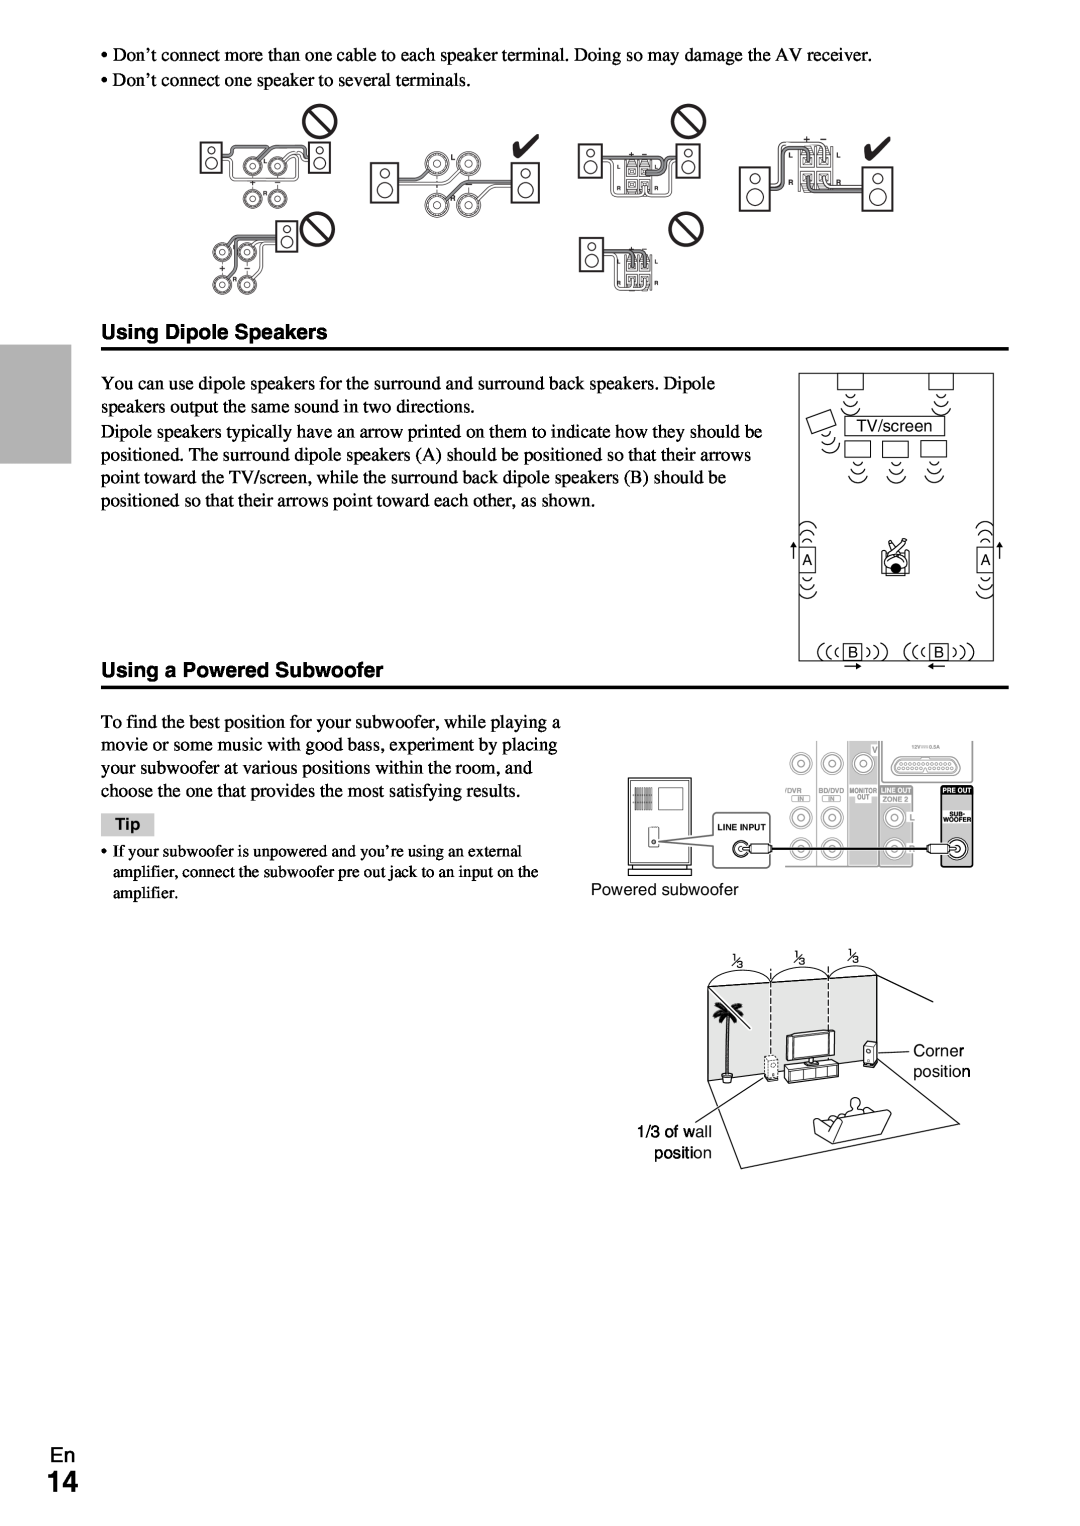 Onkyo HT-R990 instruction manual Using Dipole Speakers, Using a Powered Subwoofer 